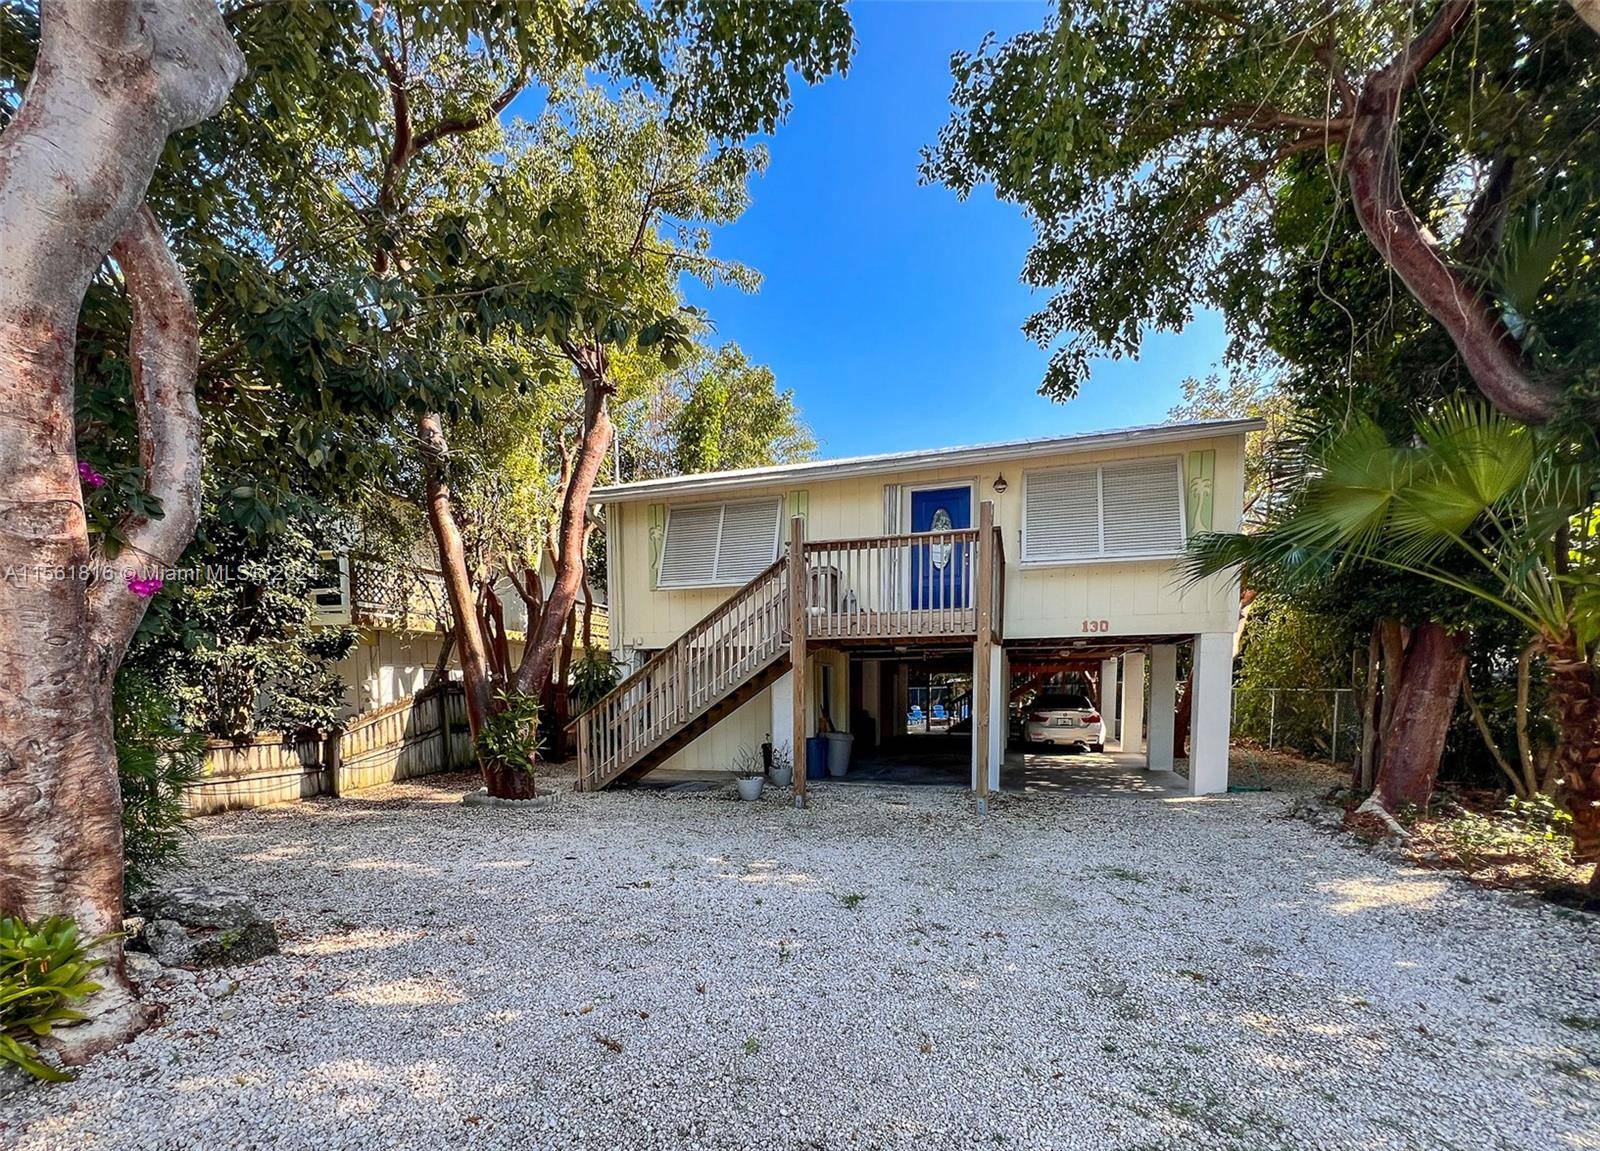 A captivating 3 bedroom, 1 bath home situated in the historic Old Tavernier district, where the charm of the Florida Keys meets modern convenience.